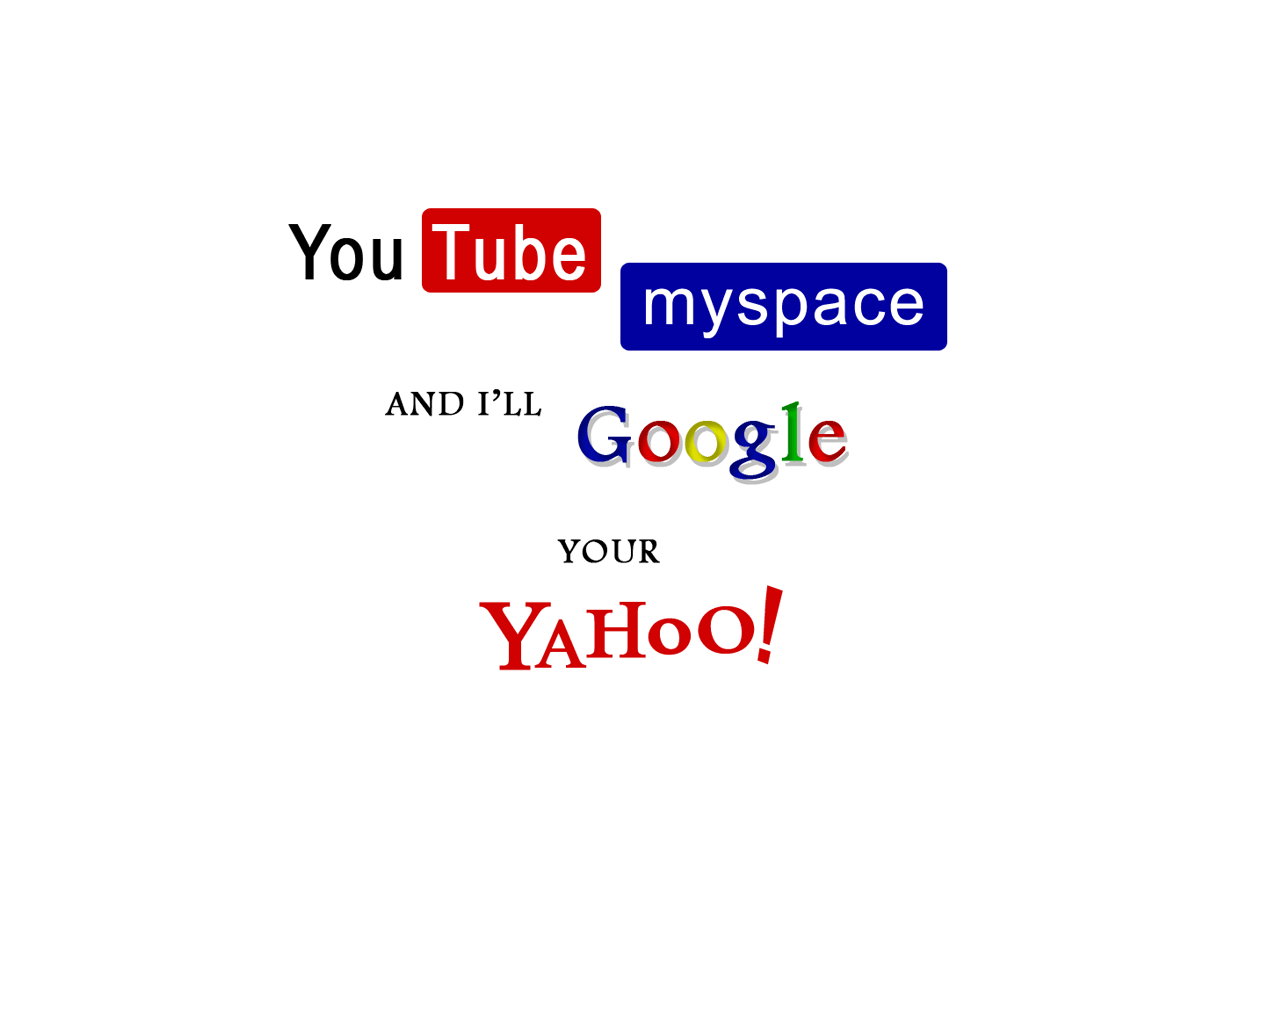 Wallpaper Myspace And Ill Google Your Yahoo